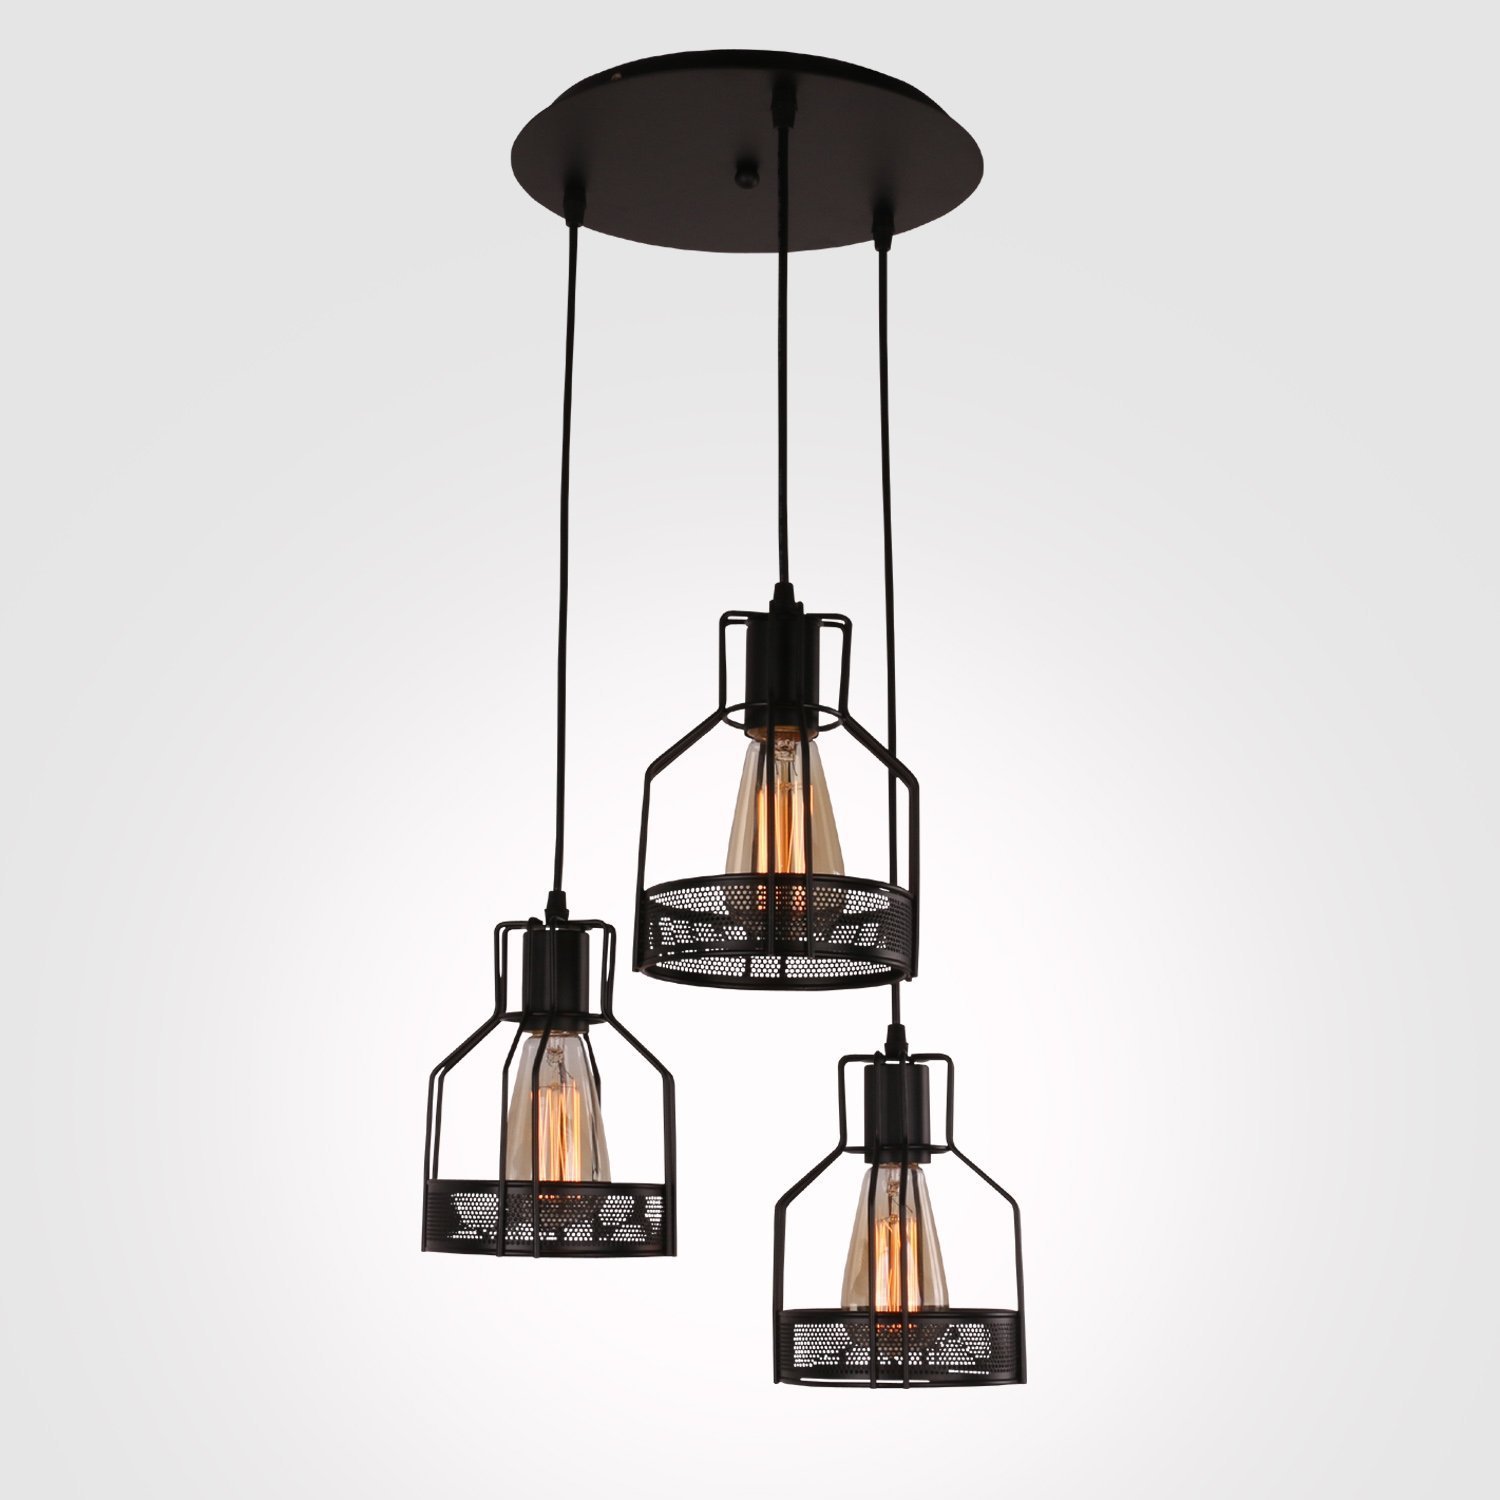 Unitary Brand Rustic Black Metal Cage Shade Dining Room Pendant Light with 3 E26 Bulb Sockets 120W Painted Finish